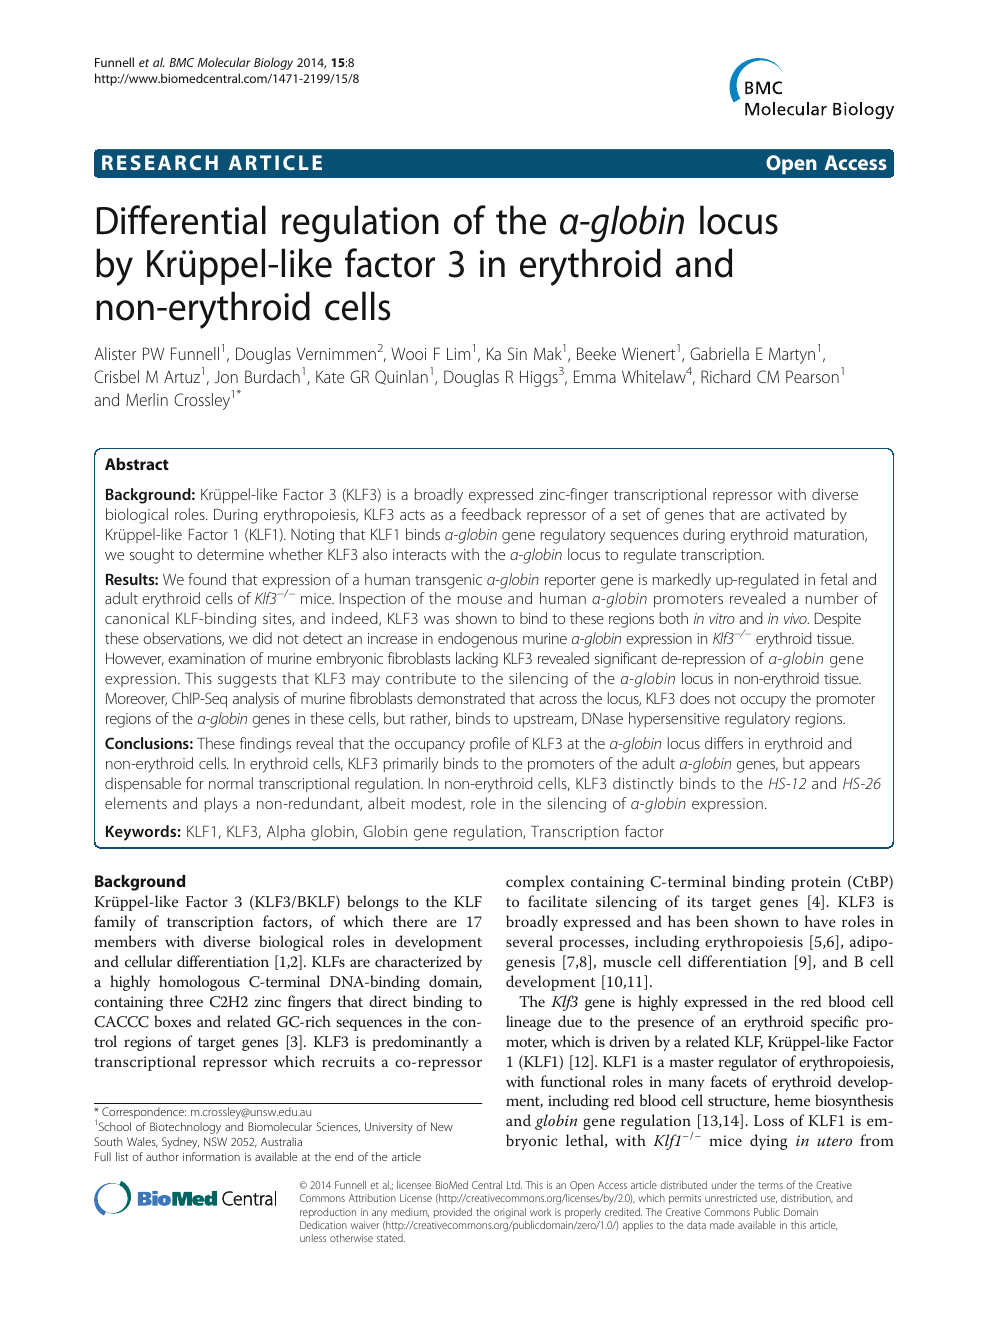 Differential Regulation Of The A Globin Locus By Kruppel Like Factor 3 In Erythroid And Non Erythroid Cells Topic Of Research Paper In Biological Sciences Download Scholarly Article Pdf And Read For Free On